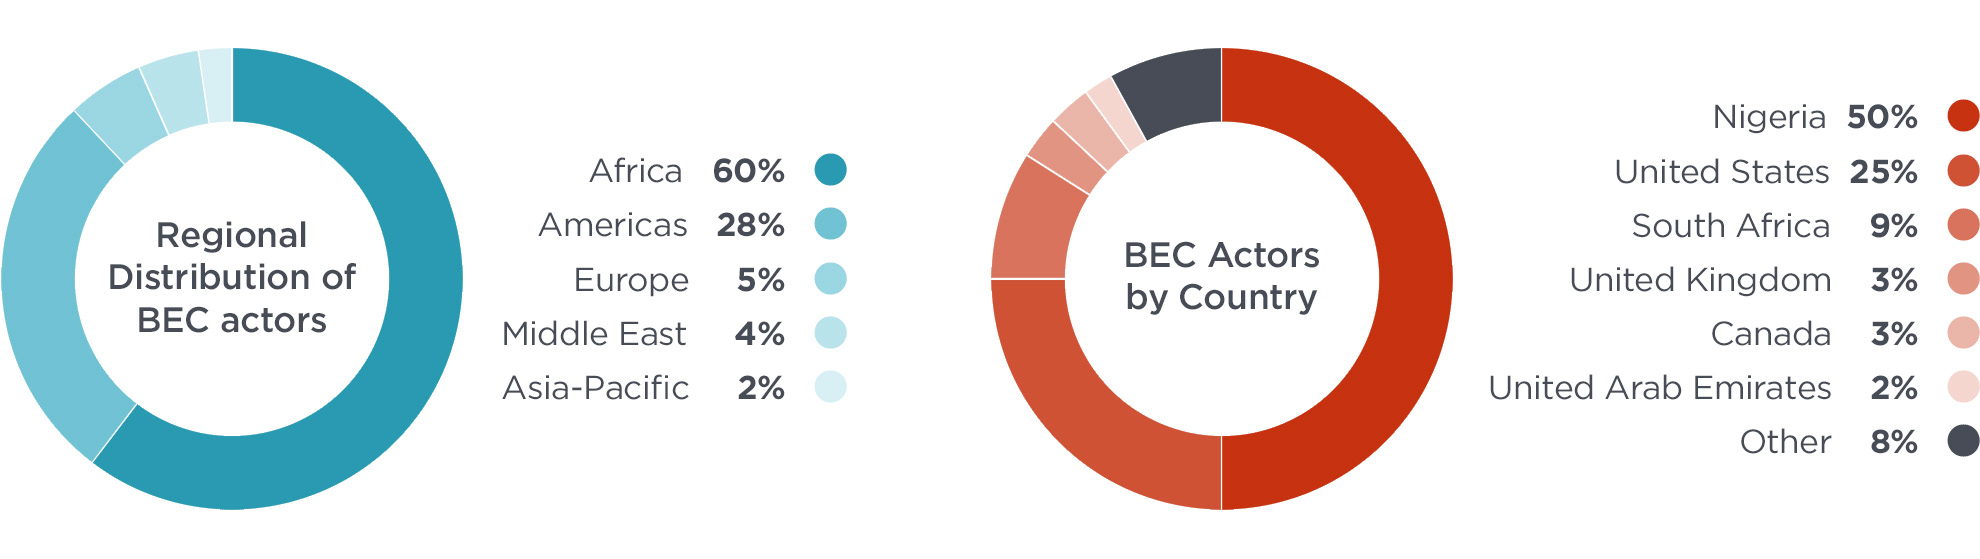 Graphic depicting BEC actors by region and country